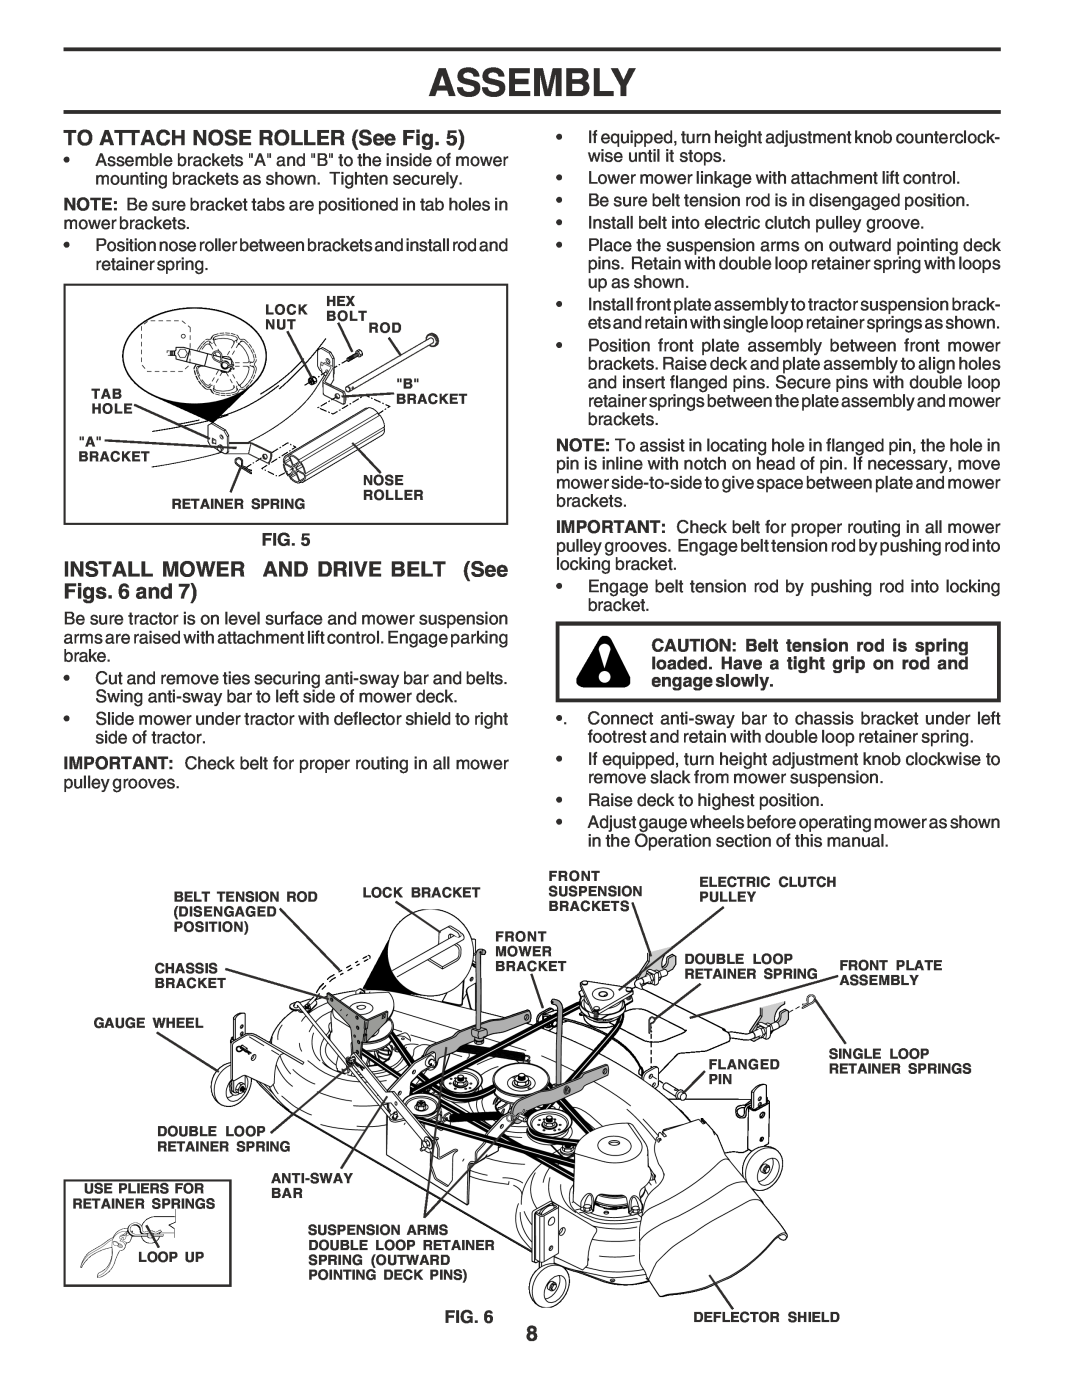 Poulan PR25PH48STC owner manual TO ATTACH NOSE ROLLER See Fig, INSTALL MOWER AND DRIVE BELT See Figs. 6 and, Assembly 